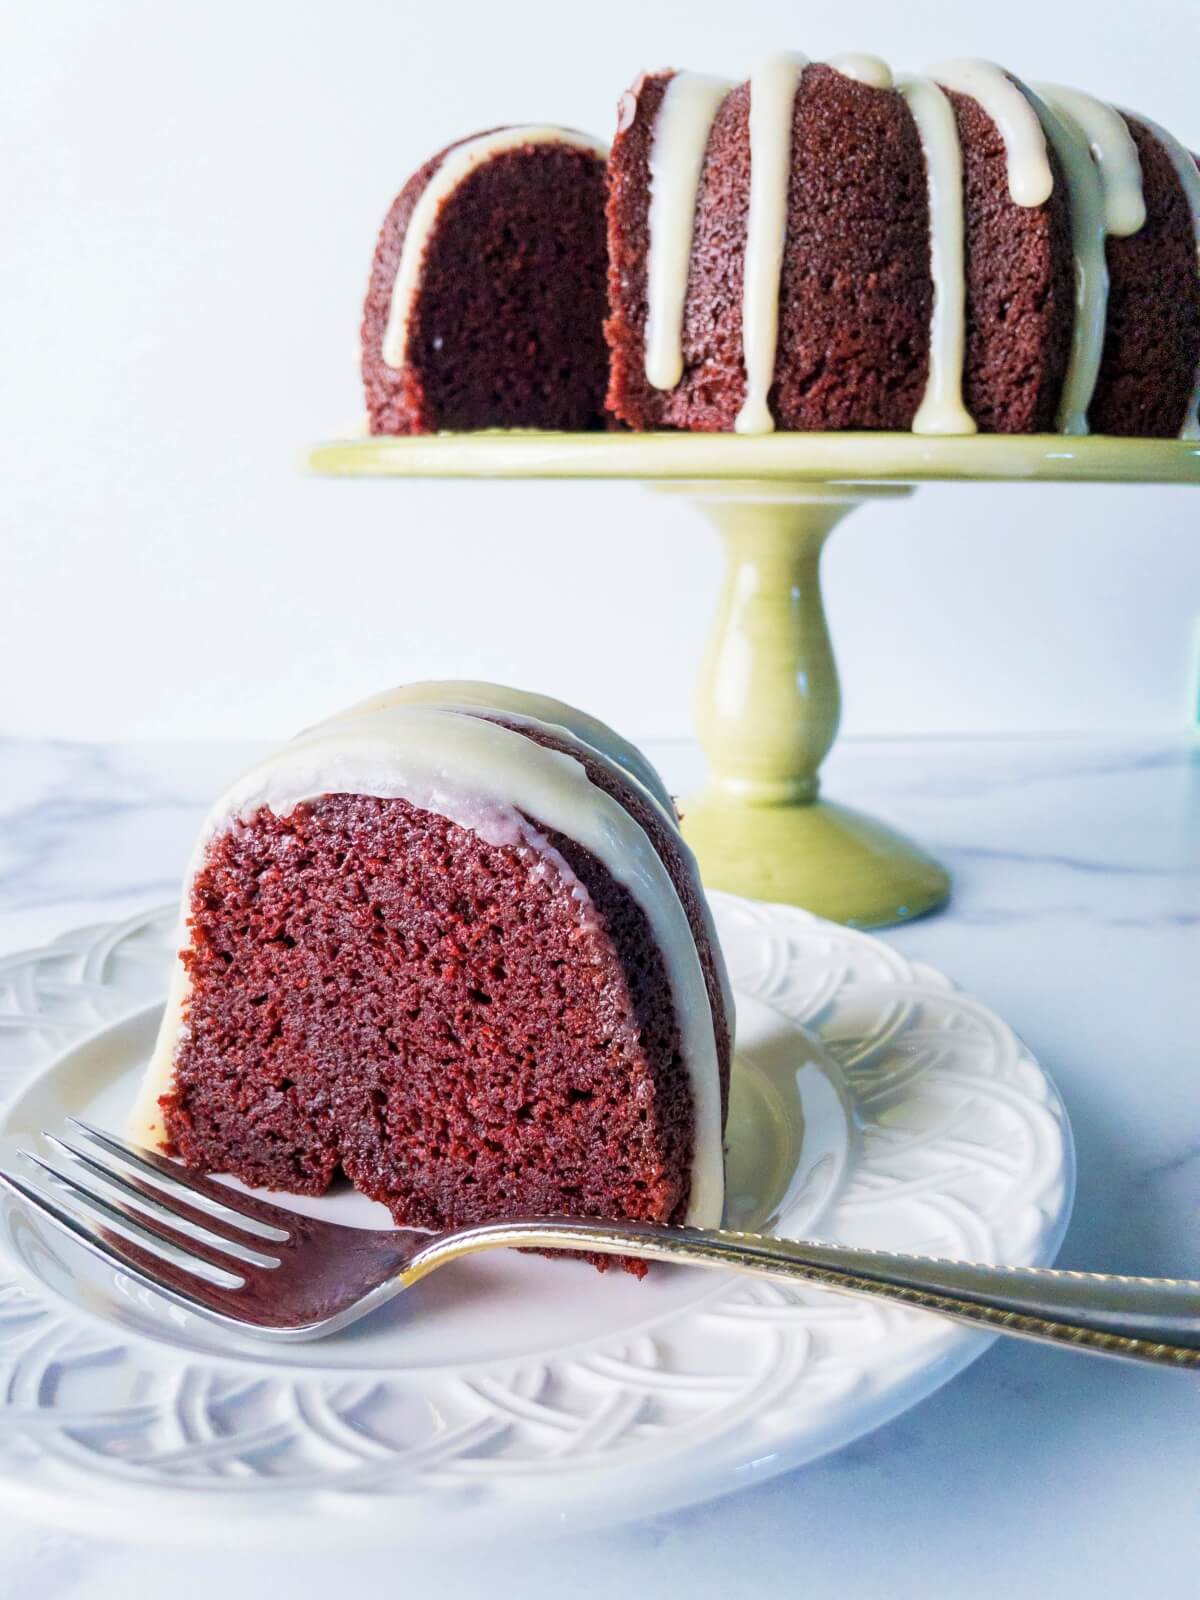 A slice of moist red velvet pound cake with a cake pedistal and the remaining cake in the background